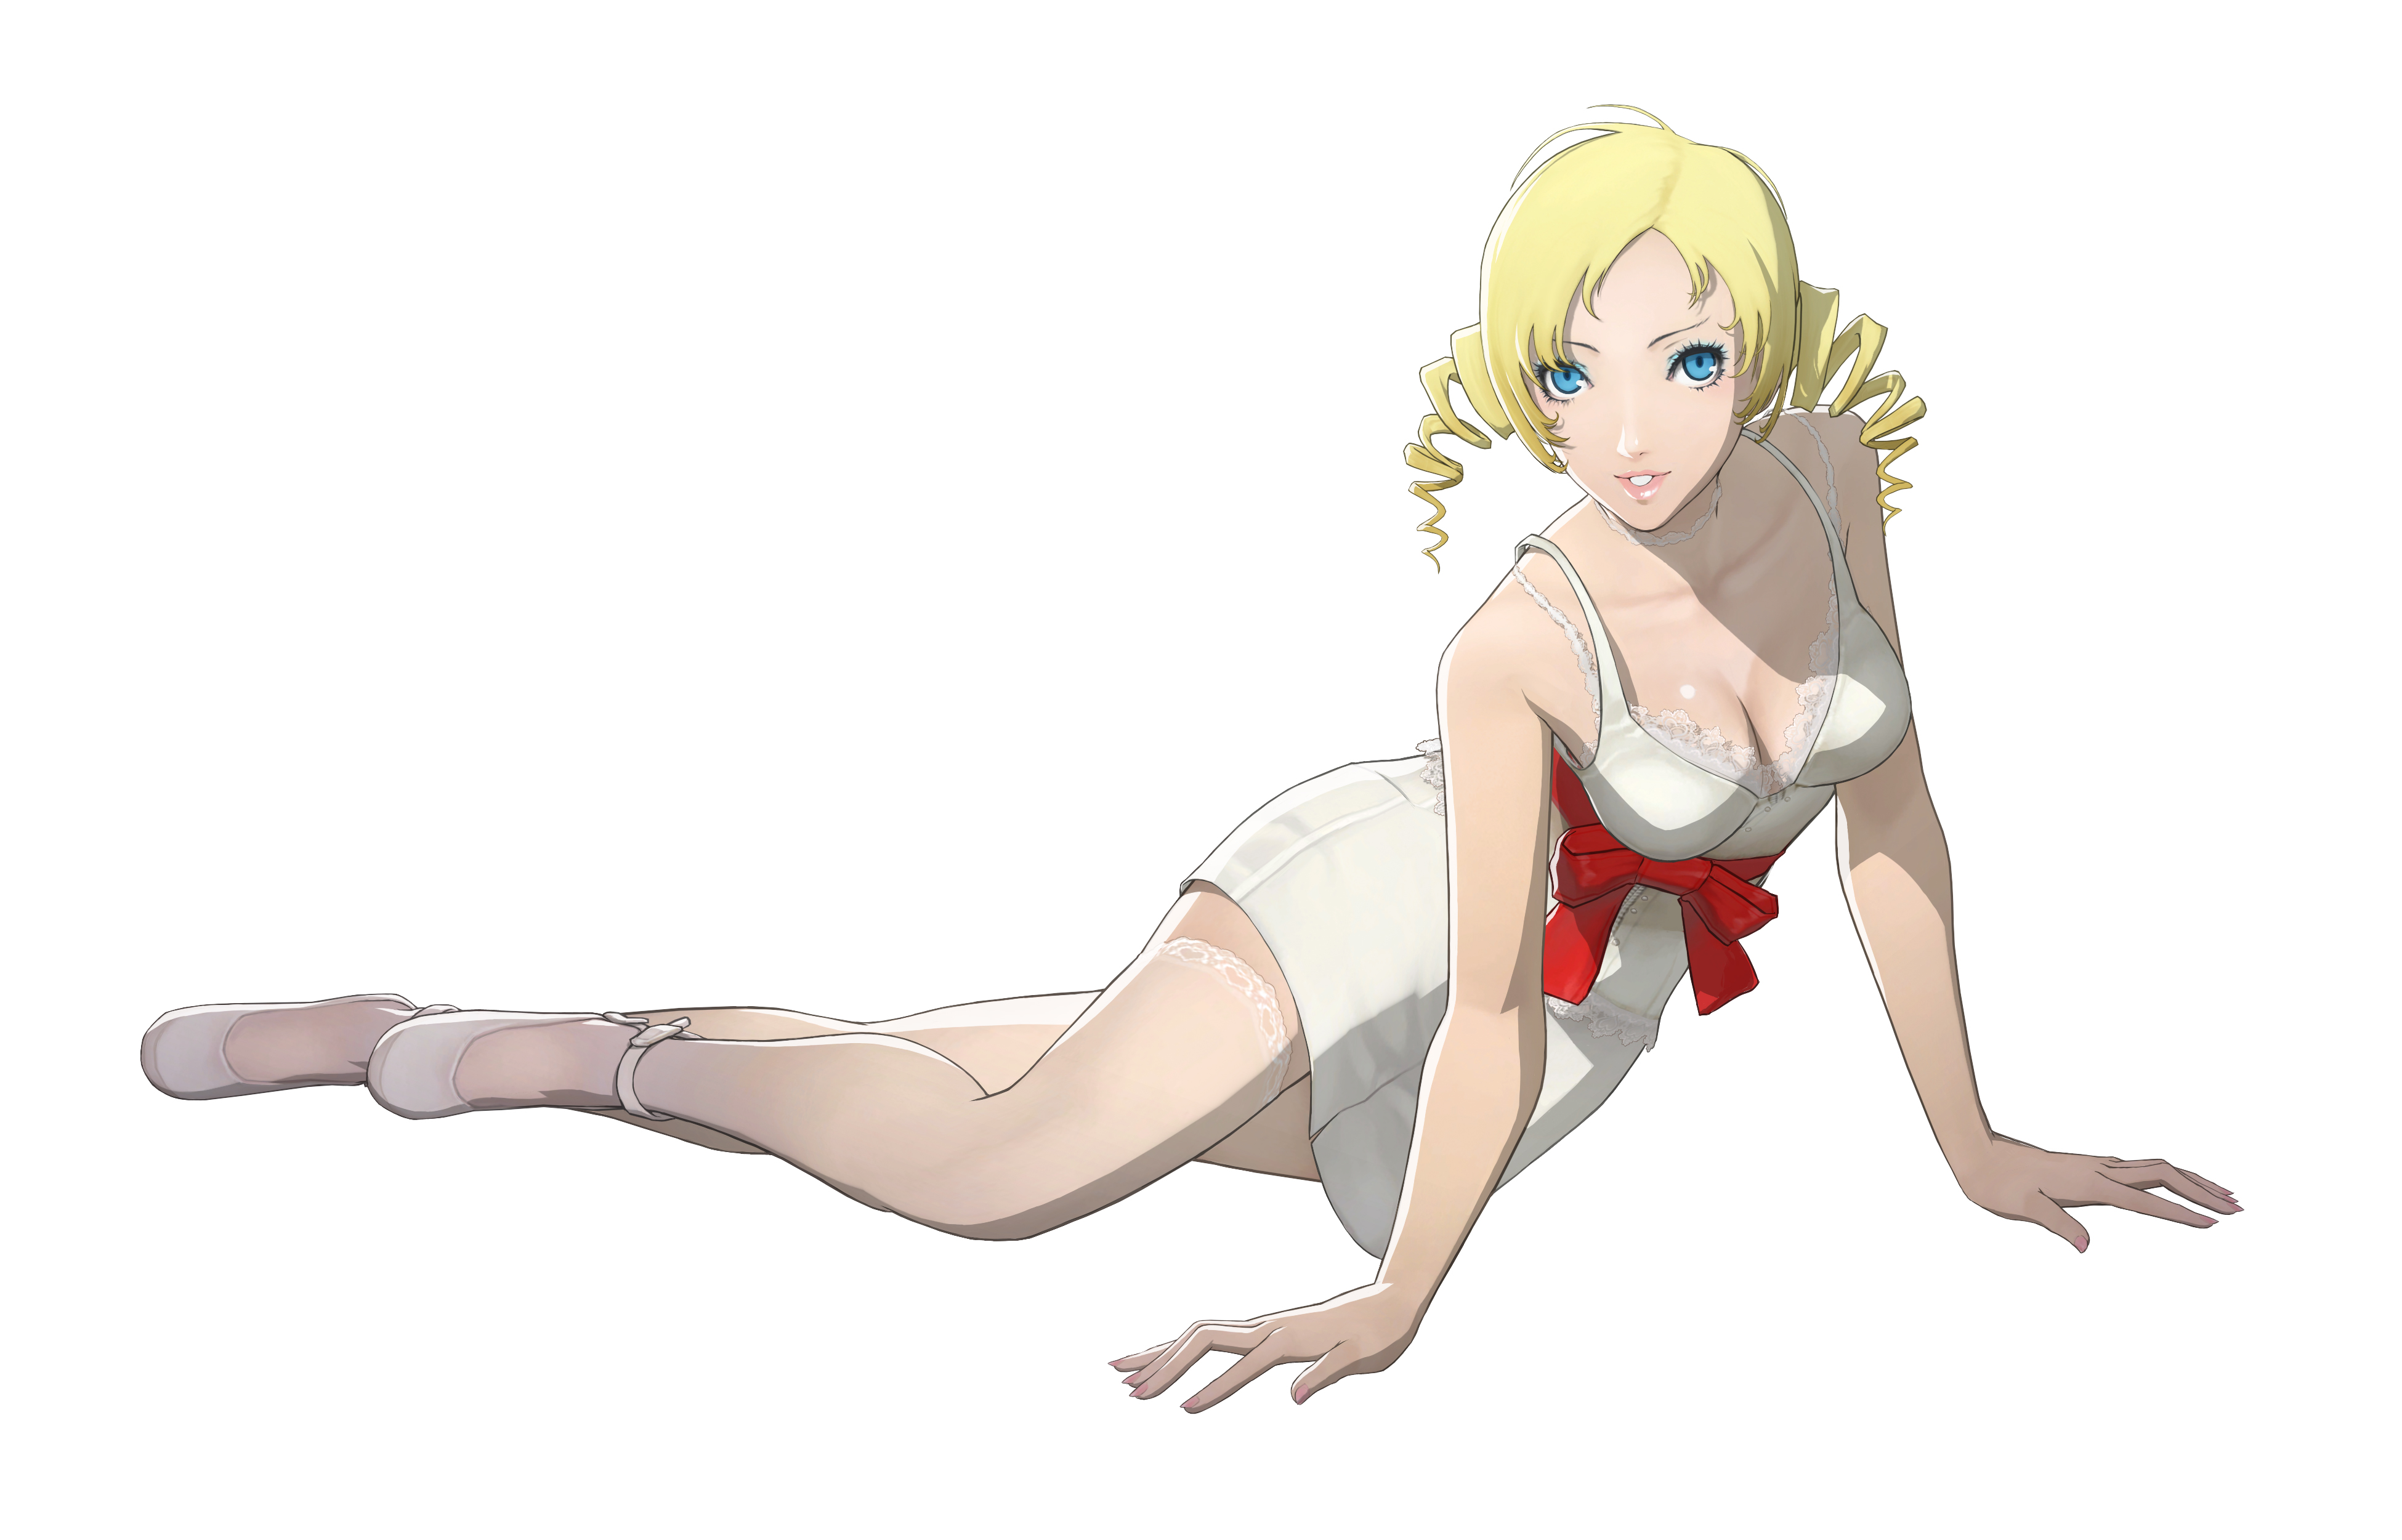 sprite contest:hot sexxi babes in most gaming and movies Catherine_characterart_catherine